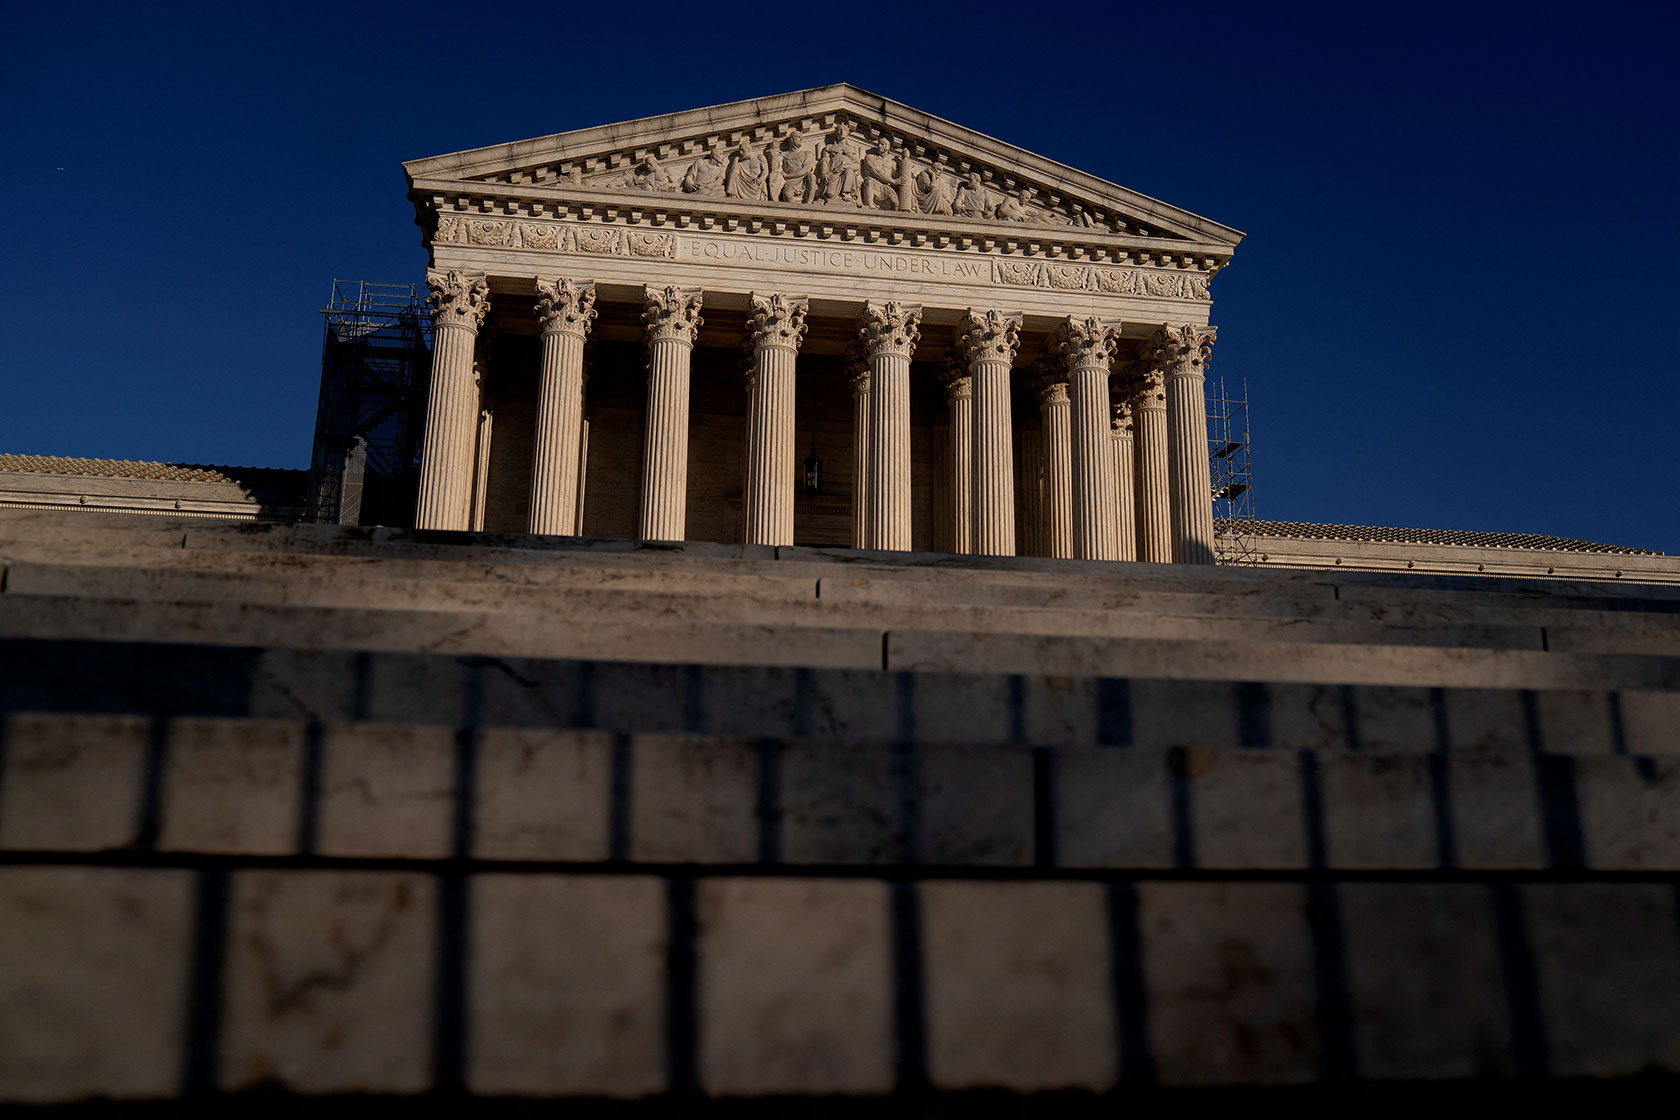 The U.S. Supreme Court is seen in Washington, D.C.